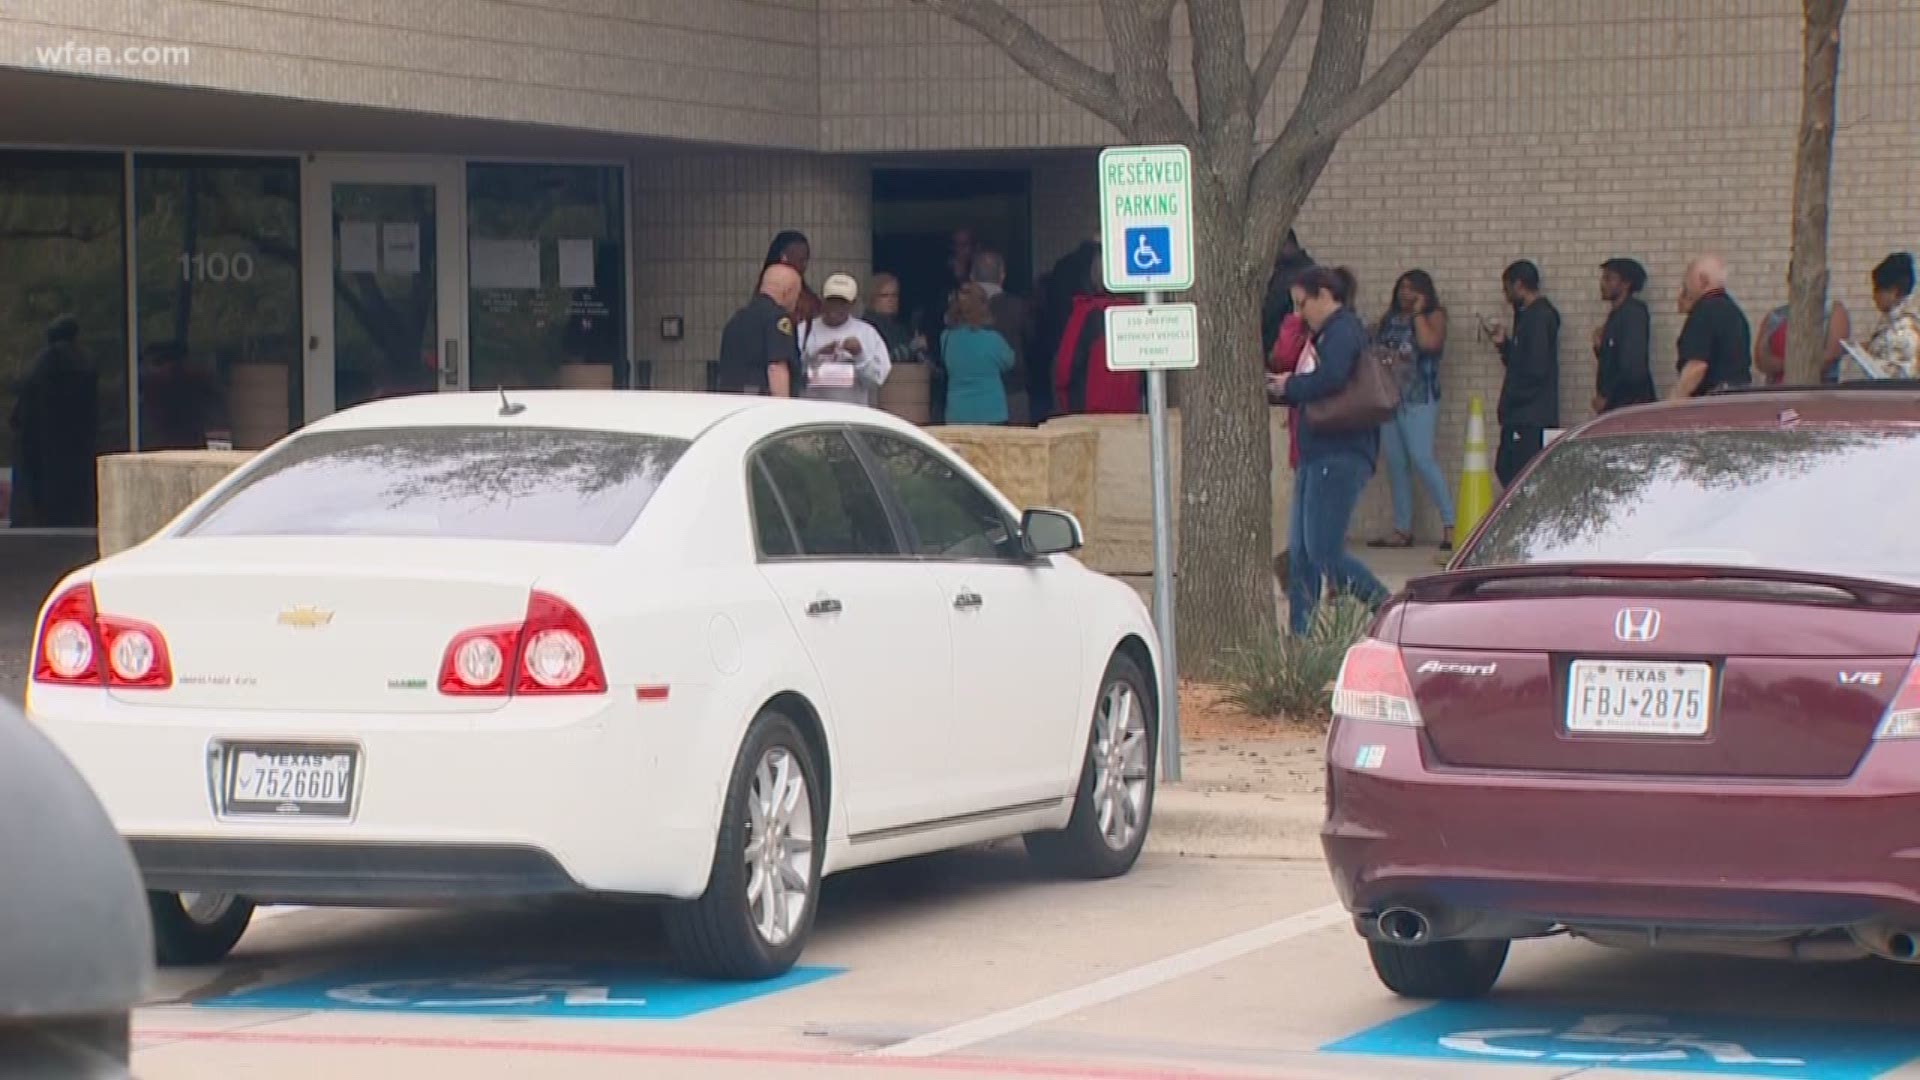 At some Tarrant County voting locations, people waited for hours to vote on Super Tuesday.